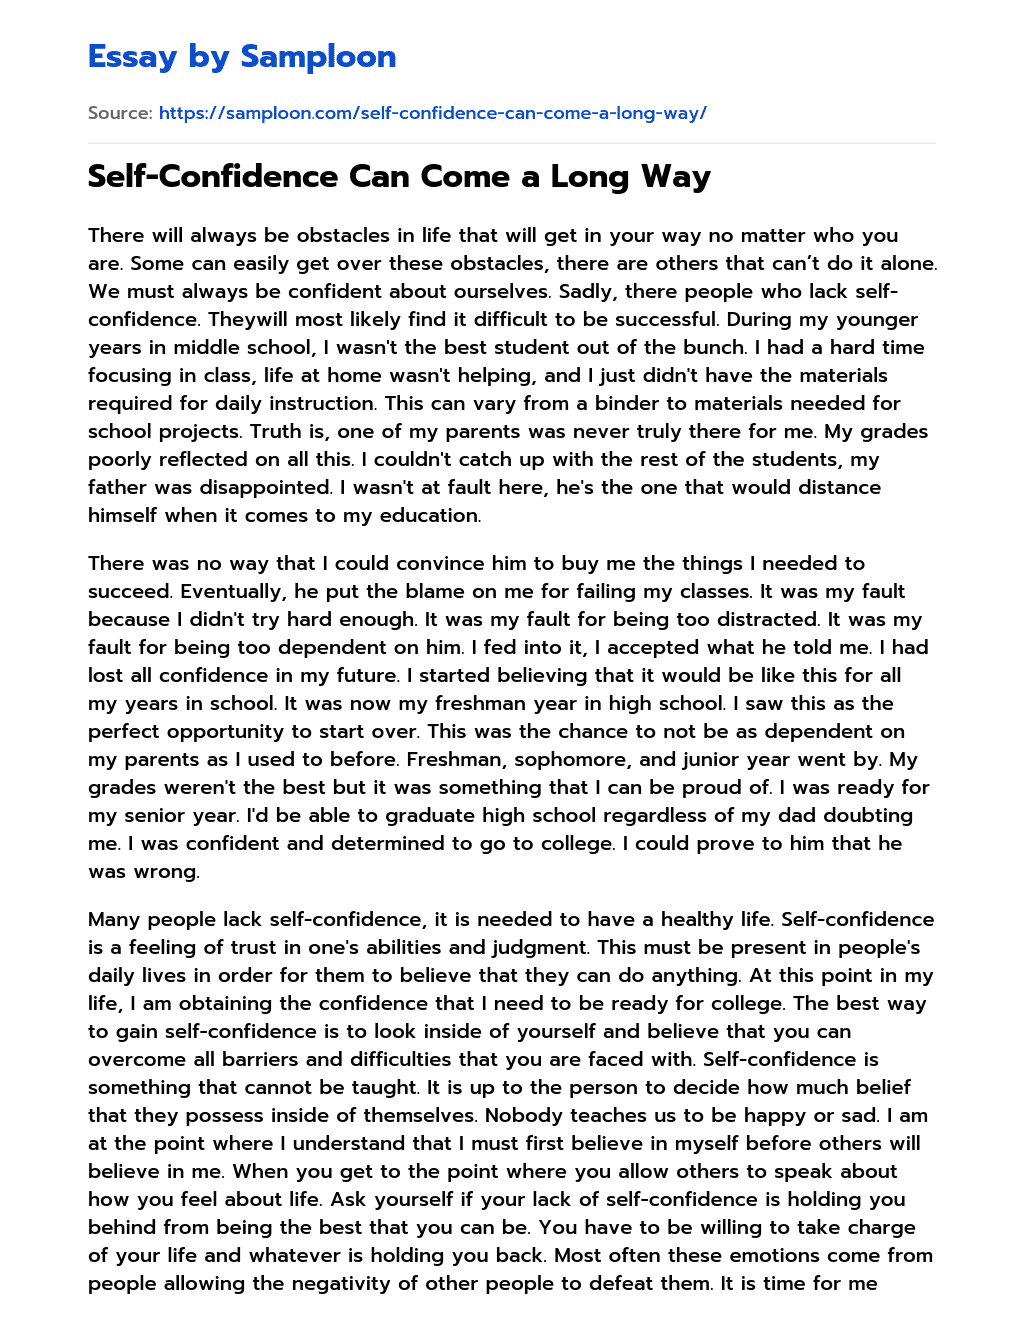 Self-Confidence Can Come a Long Way essay